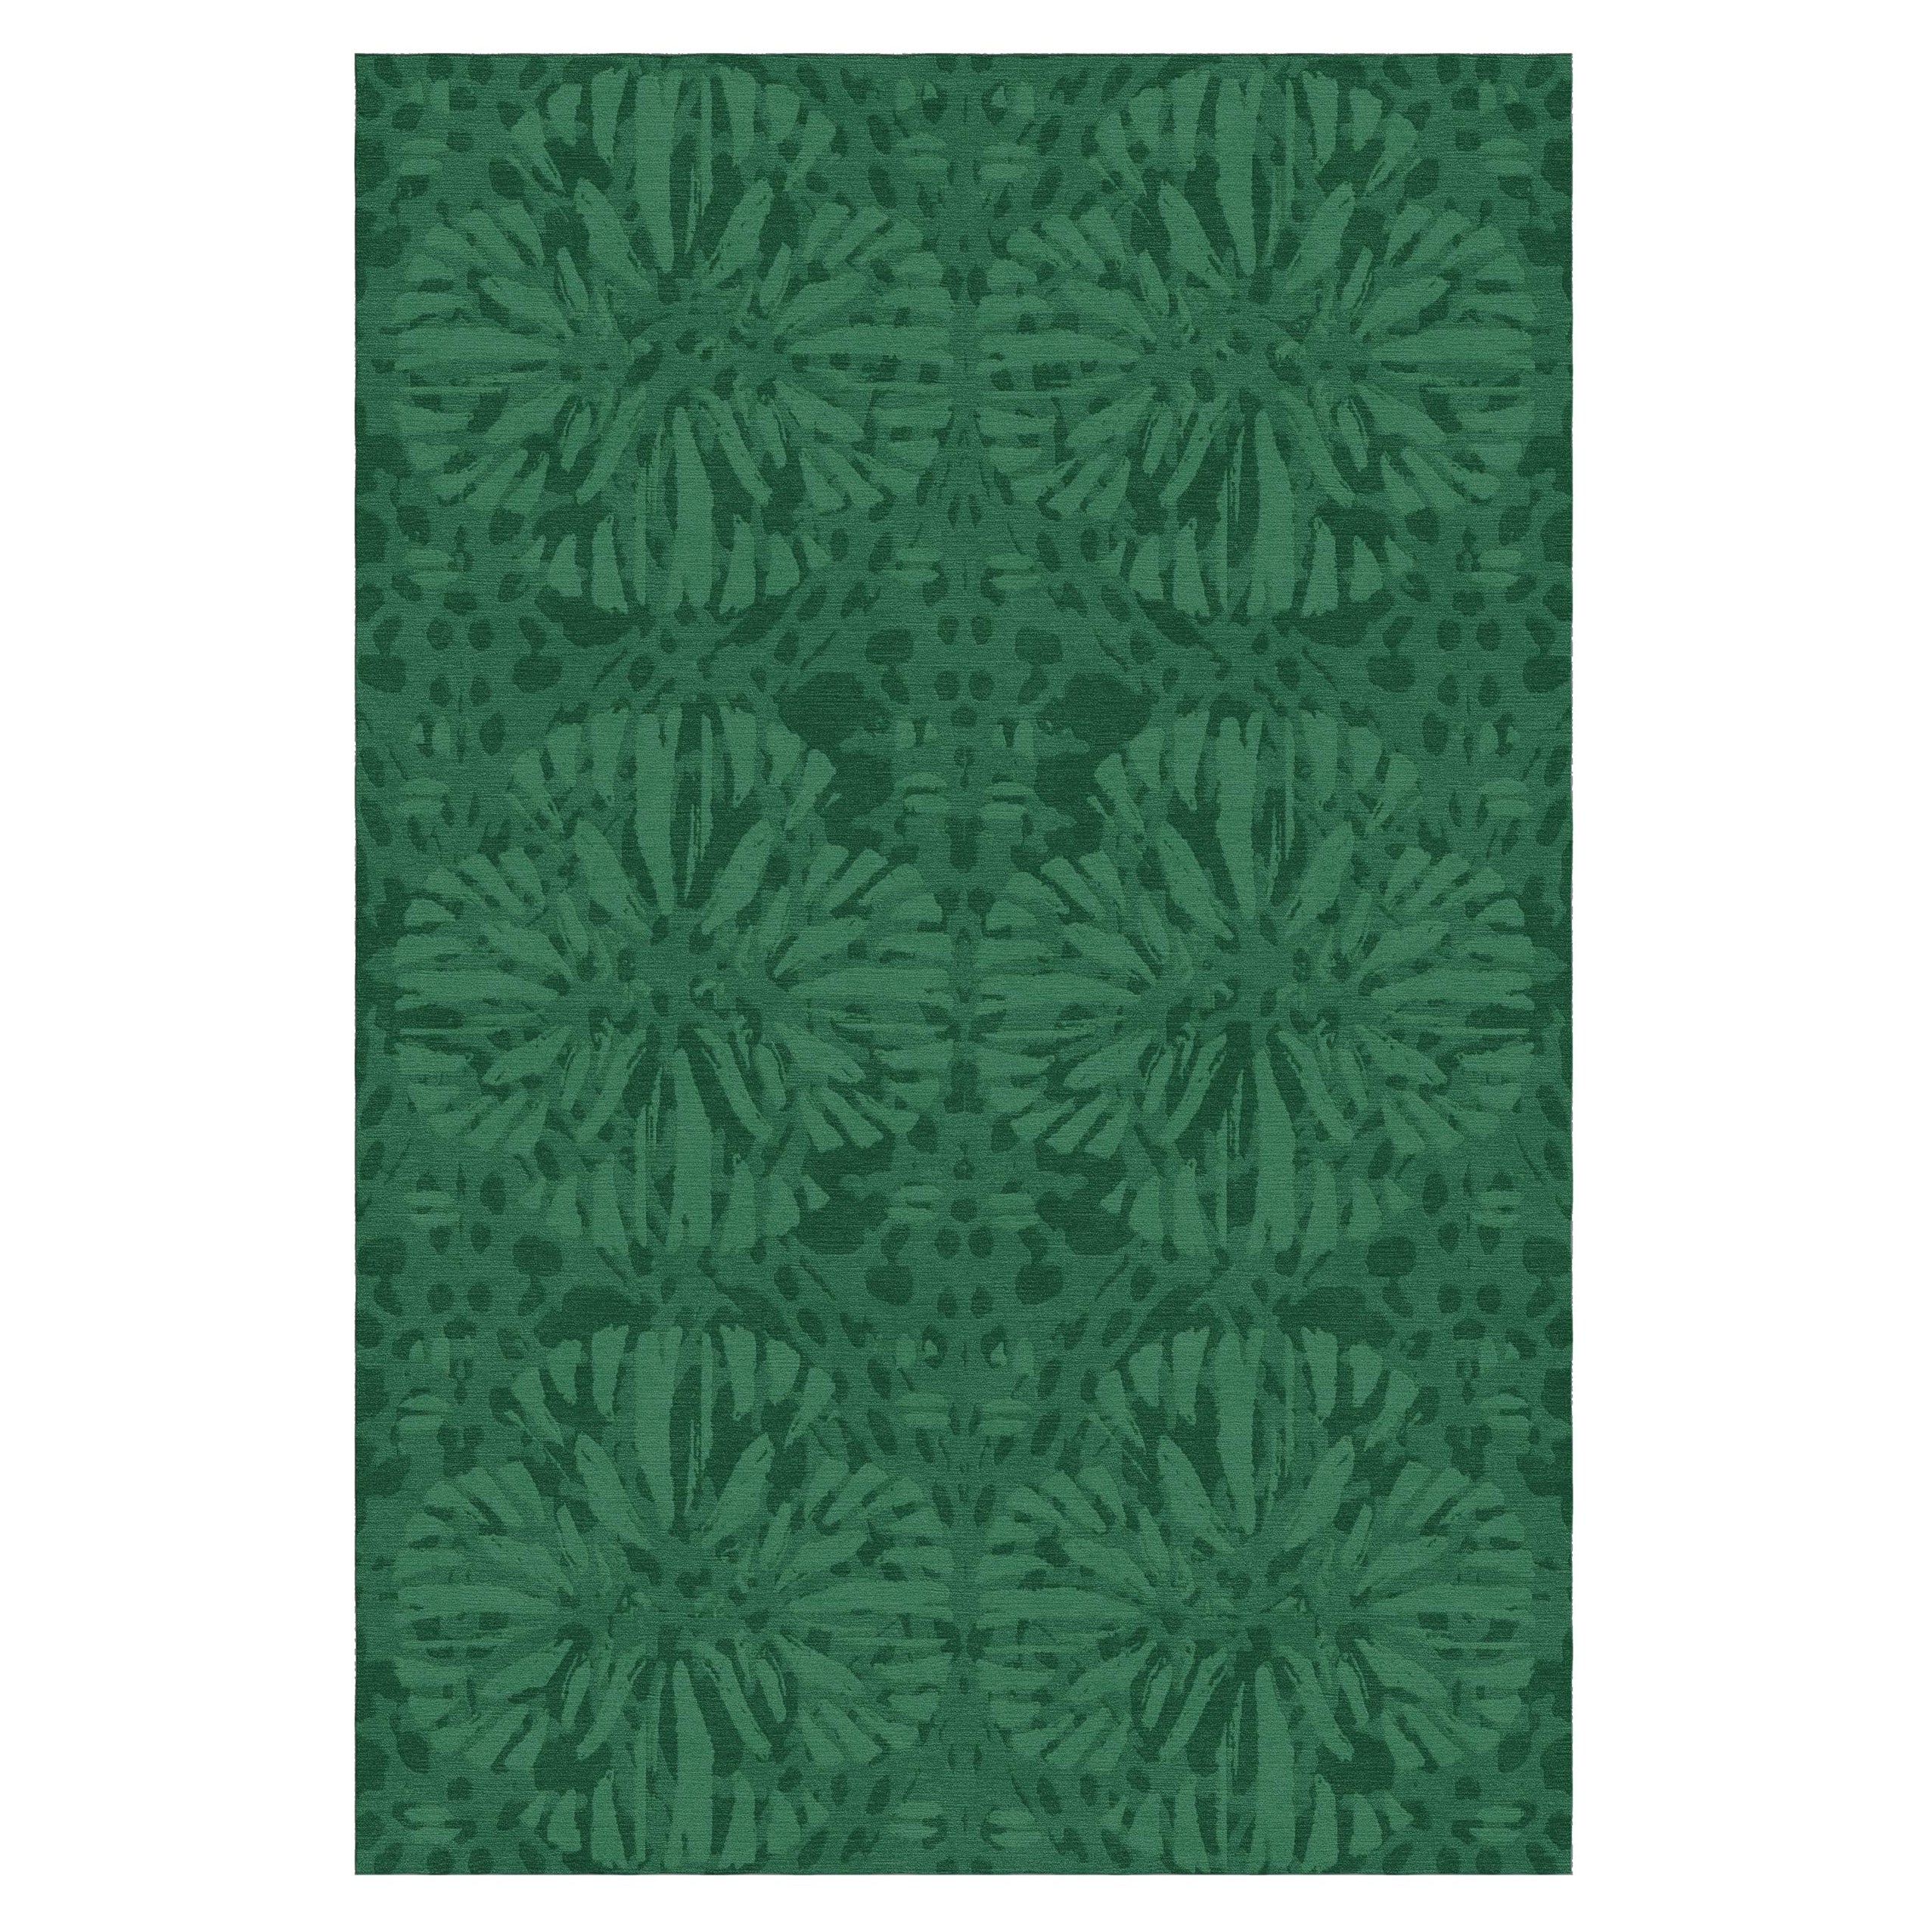 Sunflower Custom Made Hand Knotted Emerald Green Wool Rug by Allegra Hicks For Sale